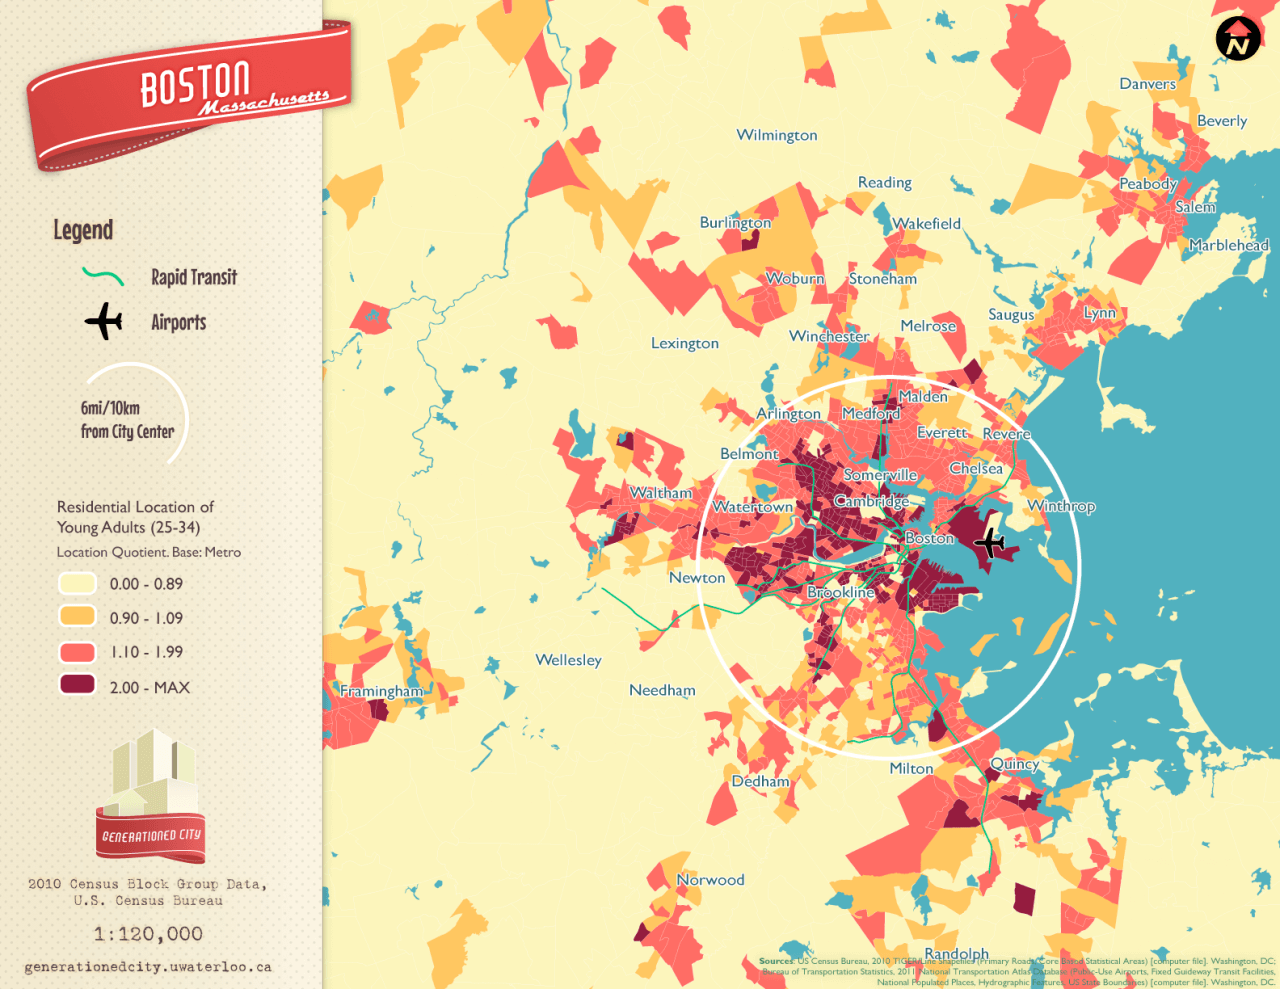 Residential location of young adults in Boston.